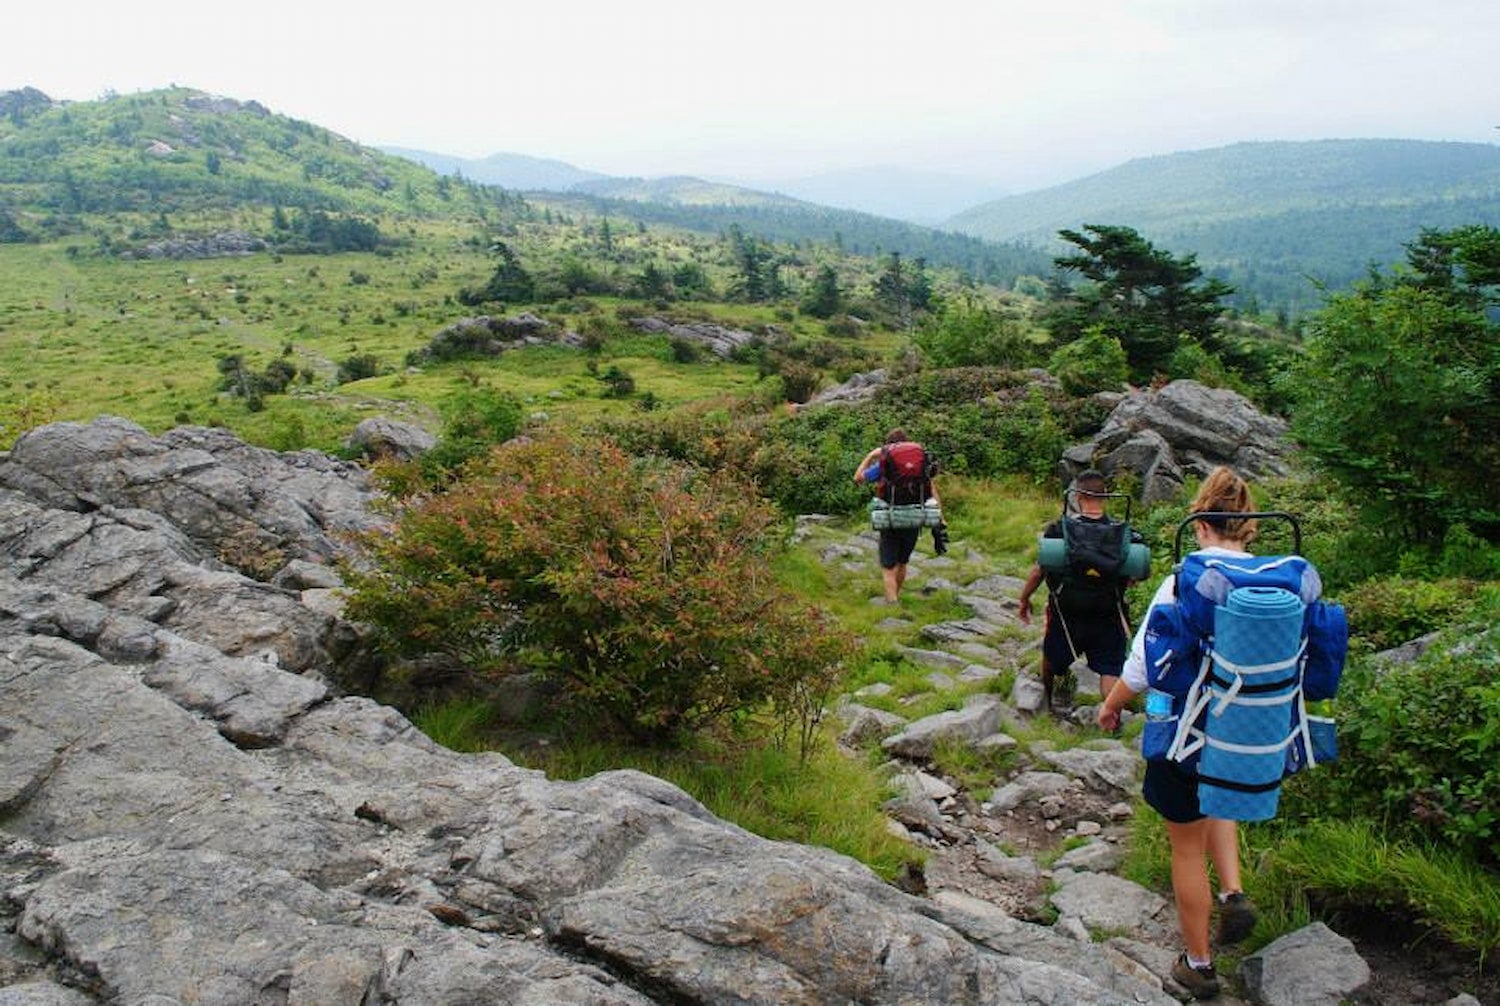 Backpackers hiking the rocky trails of Grayson Highlands surrounded by lush rolling hills.